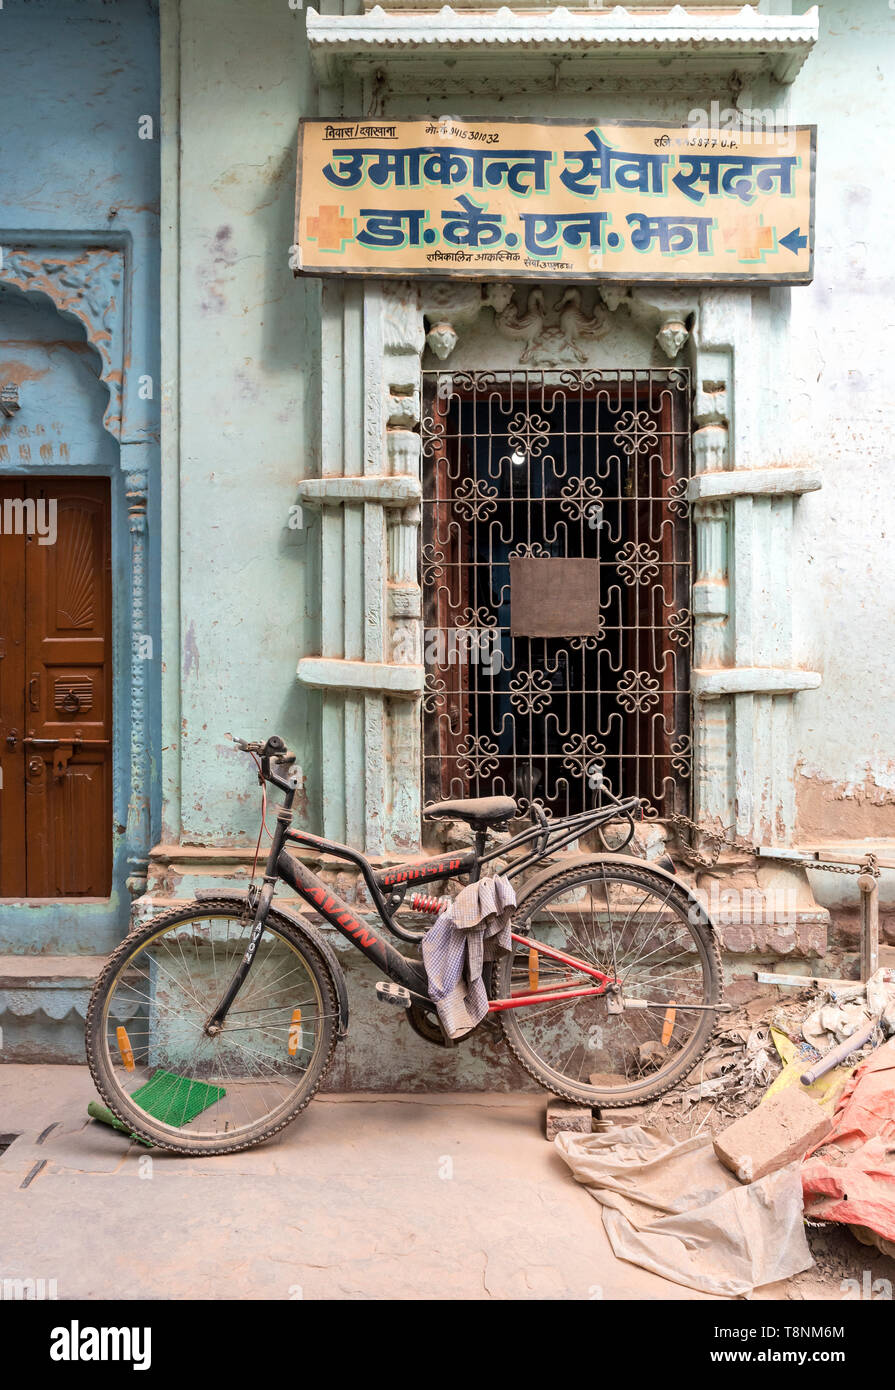 Bicycle in the streets of Old City of Varanasi, India Stock Photo